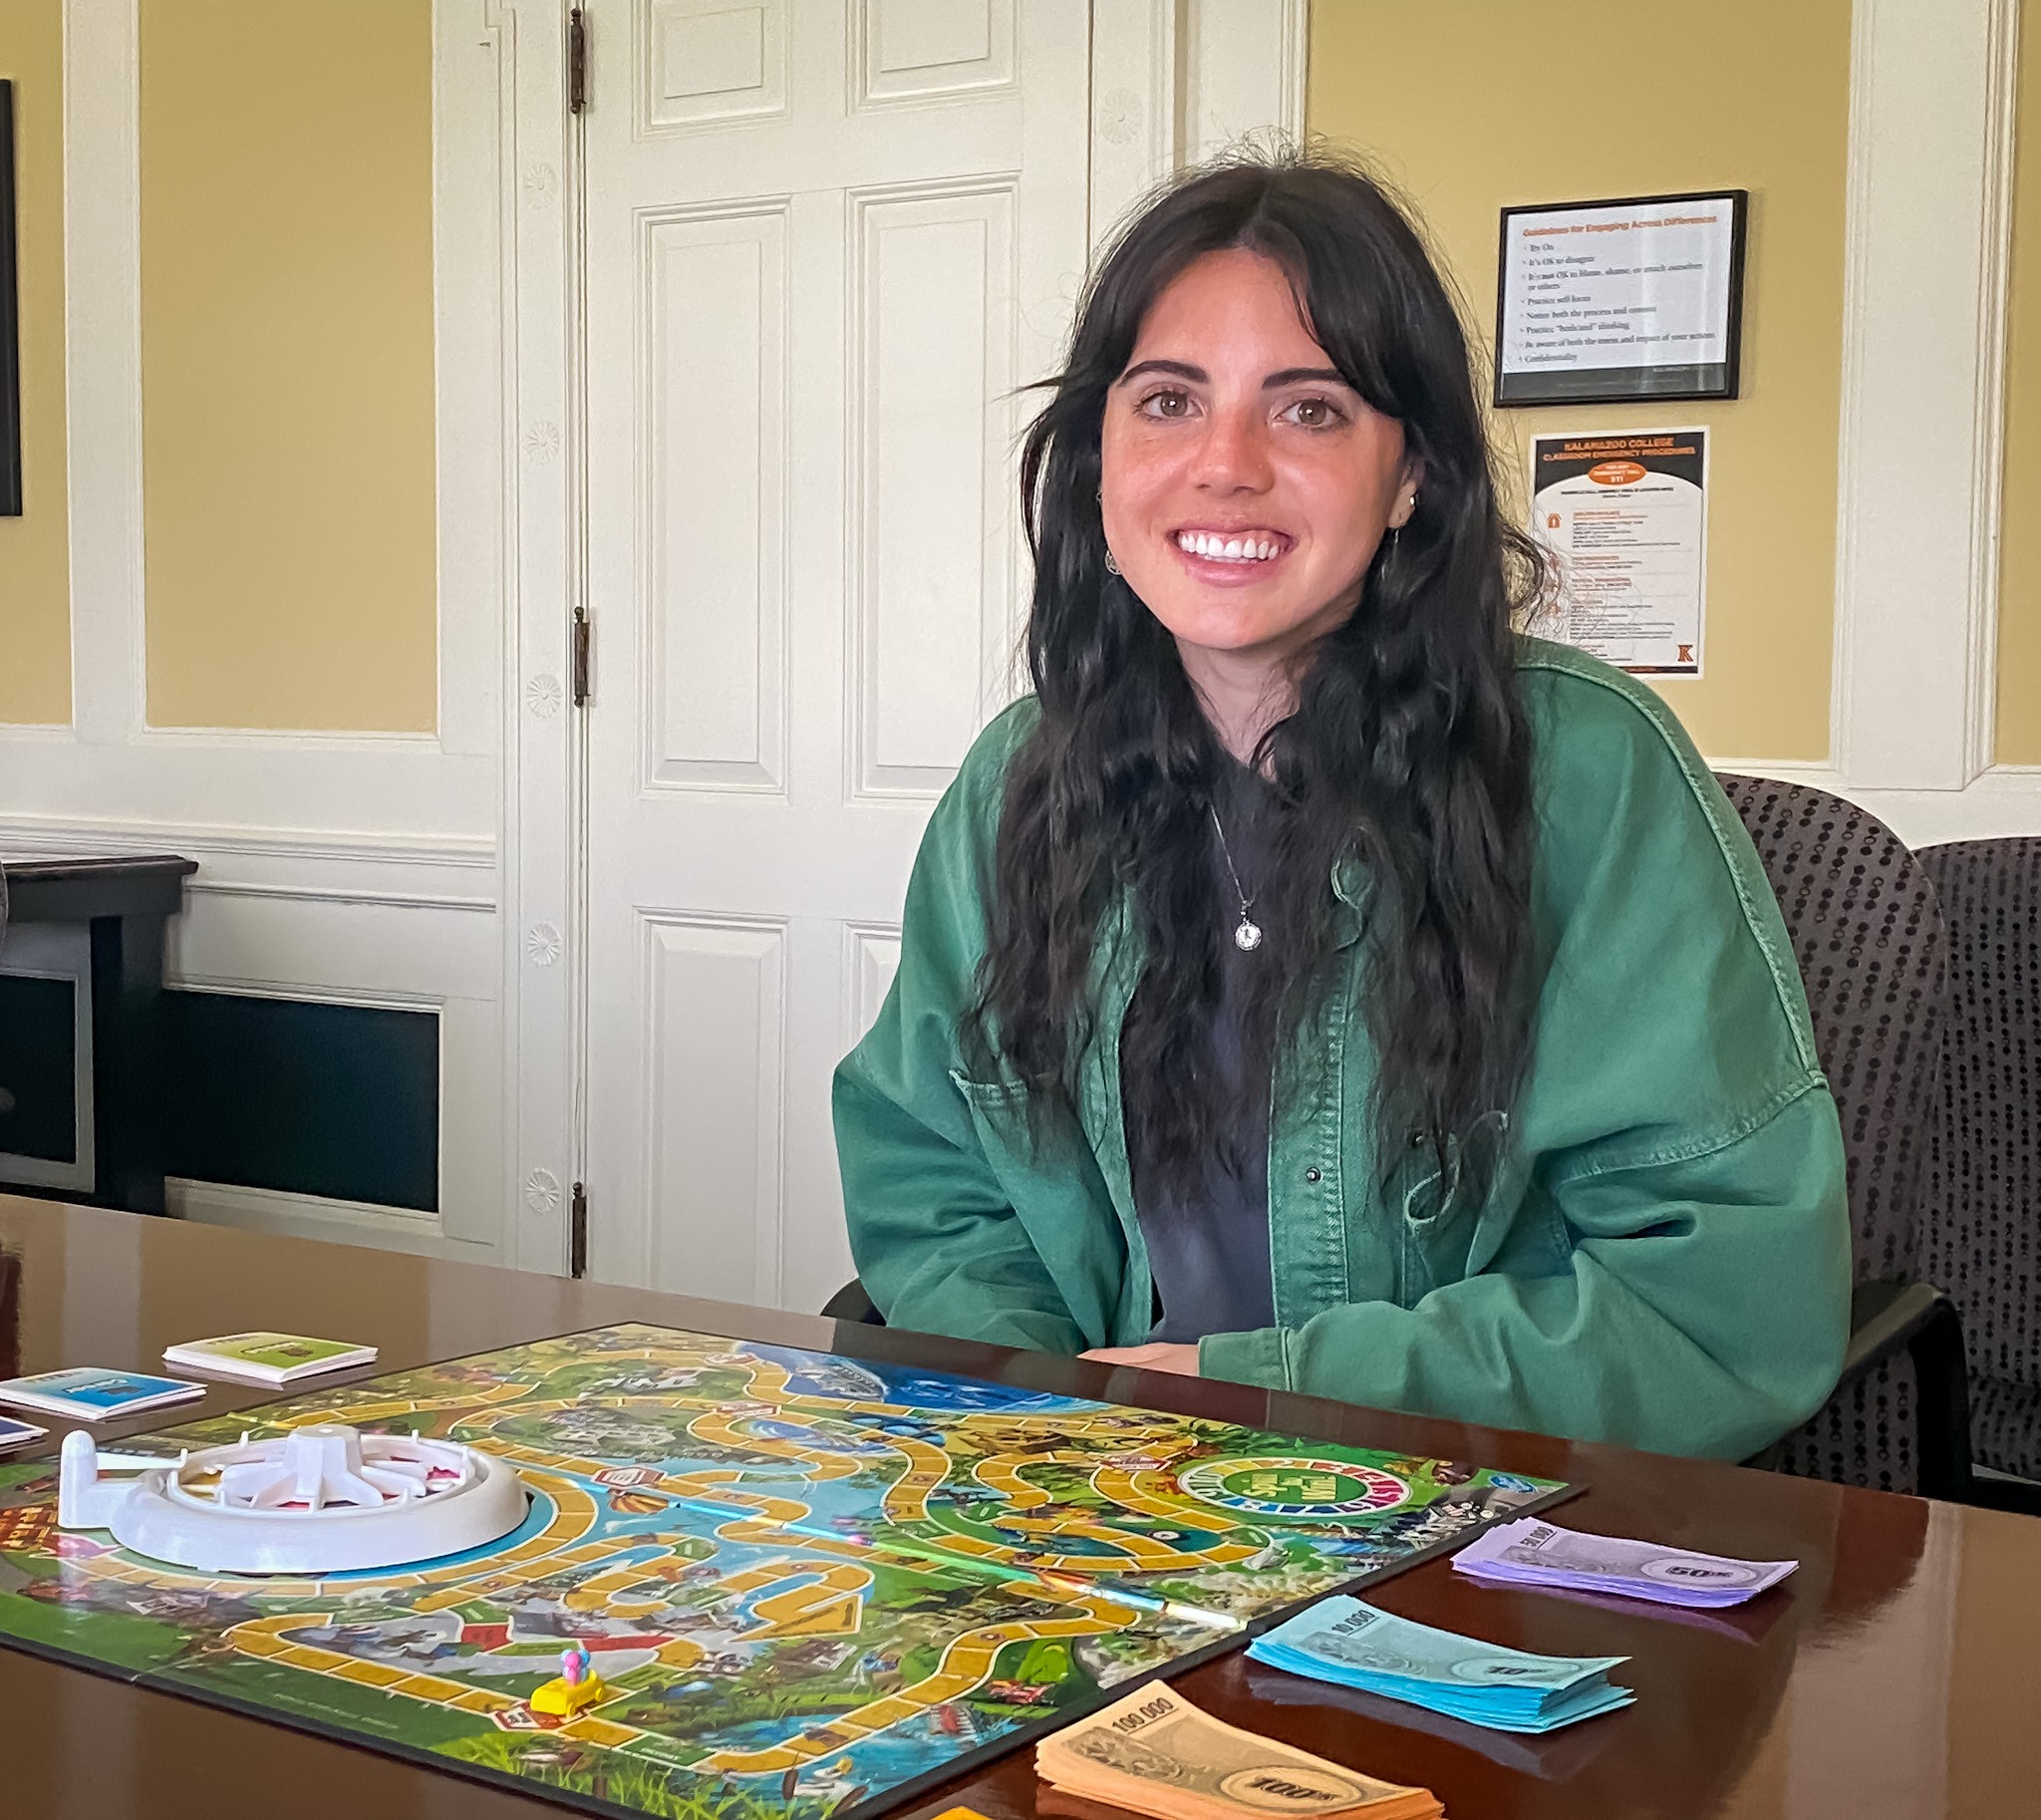 Rewriting the Rules of ‘Life’: Student Project Puts Inclusive Spin on Classic Game